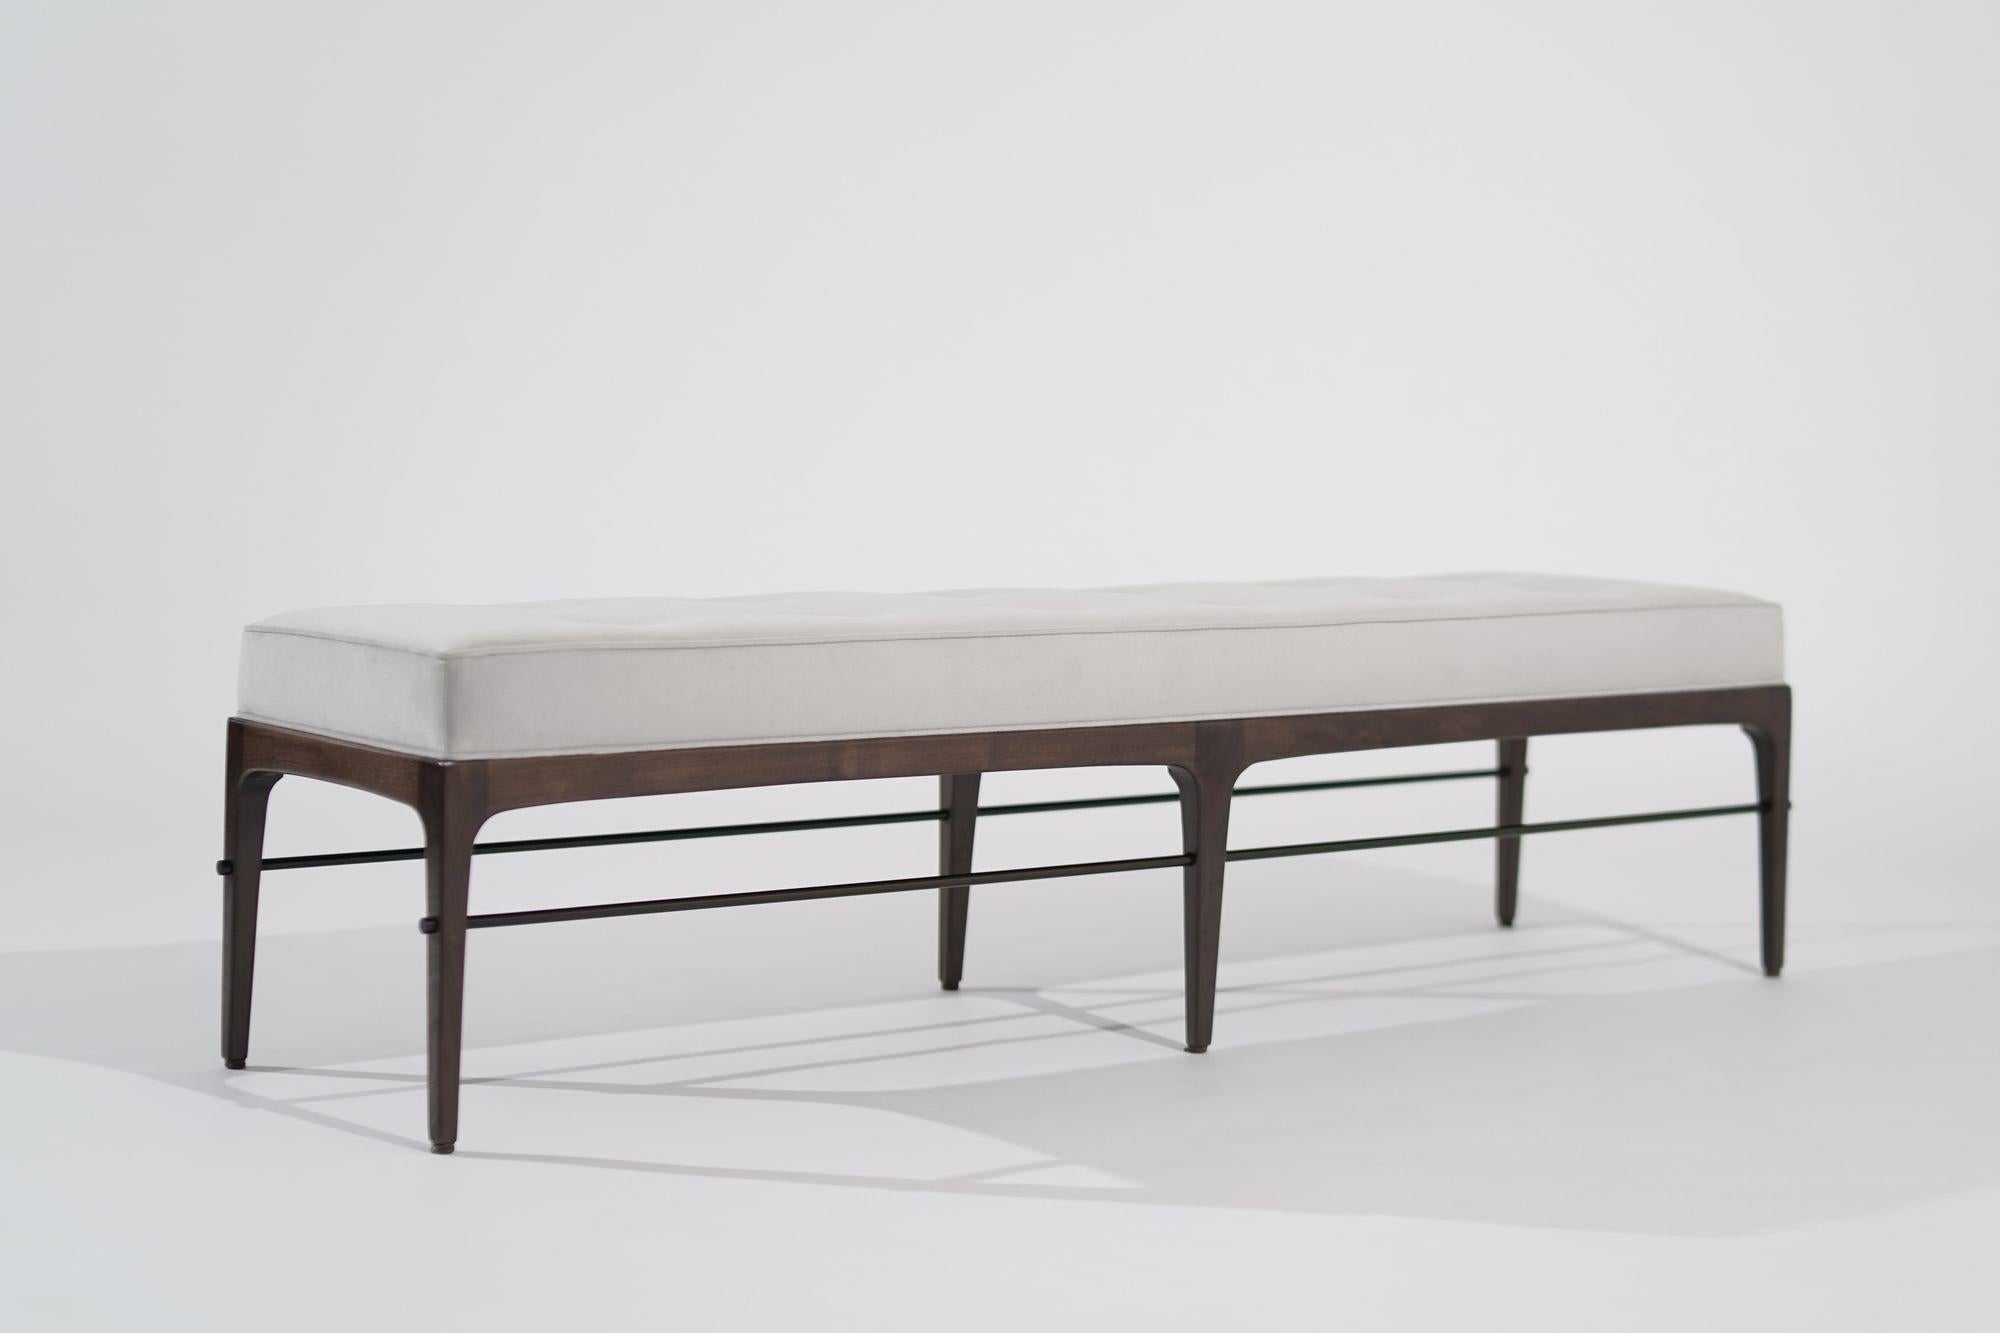 American Linear Bench in Natural Wanut Series 72 by Stamford Modern For Sale